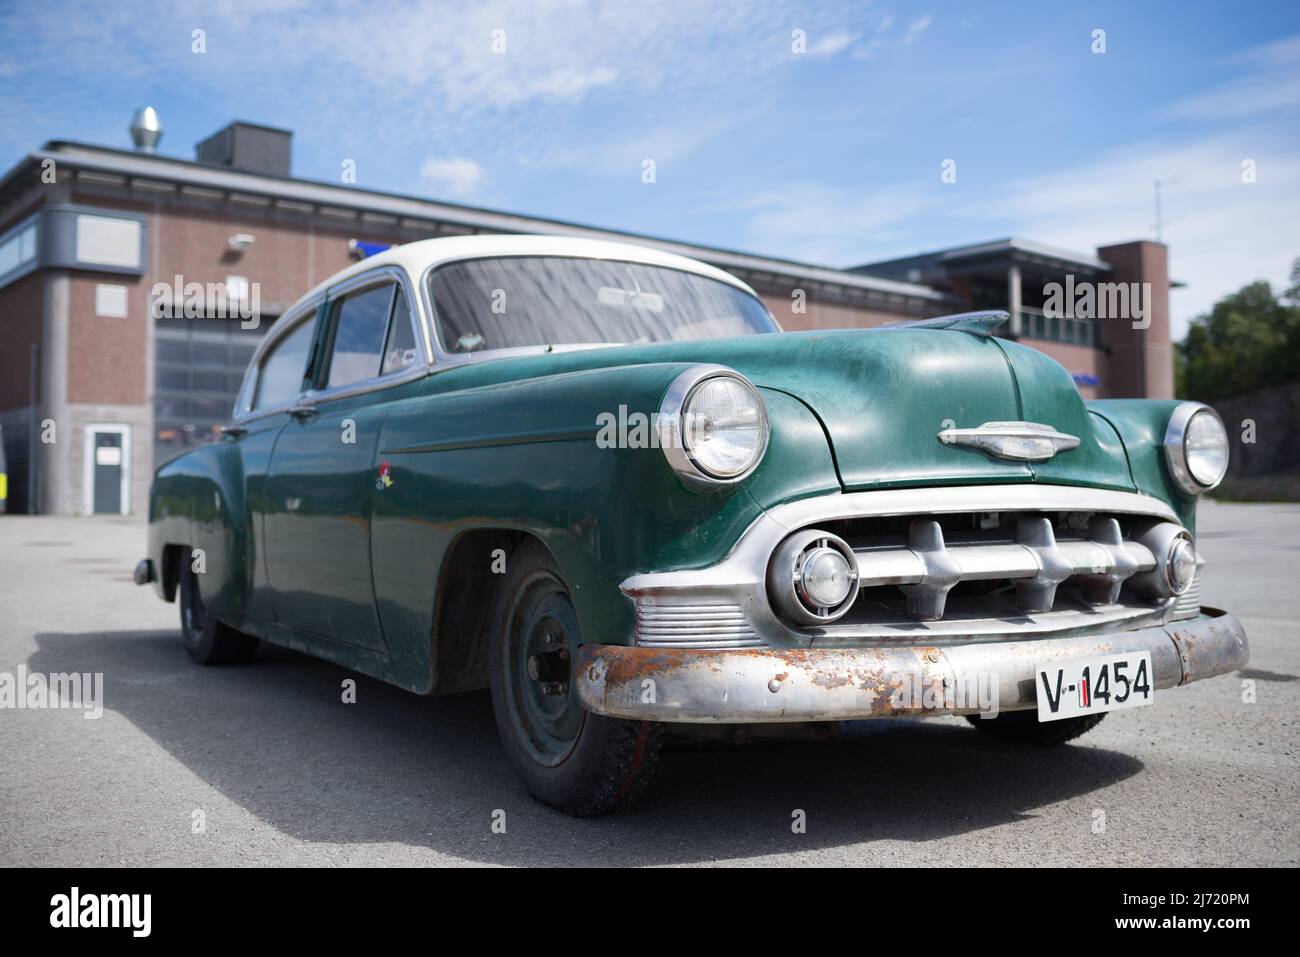 1953 green Chevrolet Bel Air Sedan with white roof in a sunny day in Norway Stock Photo